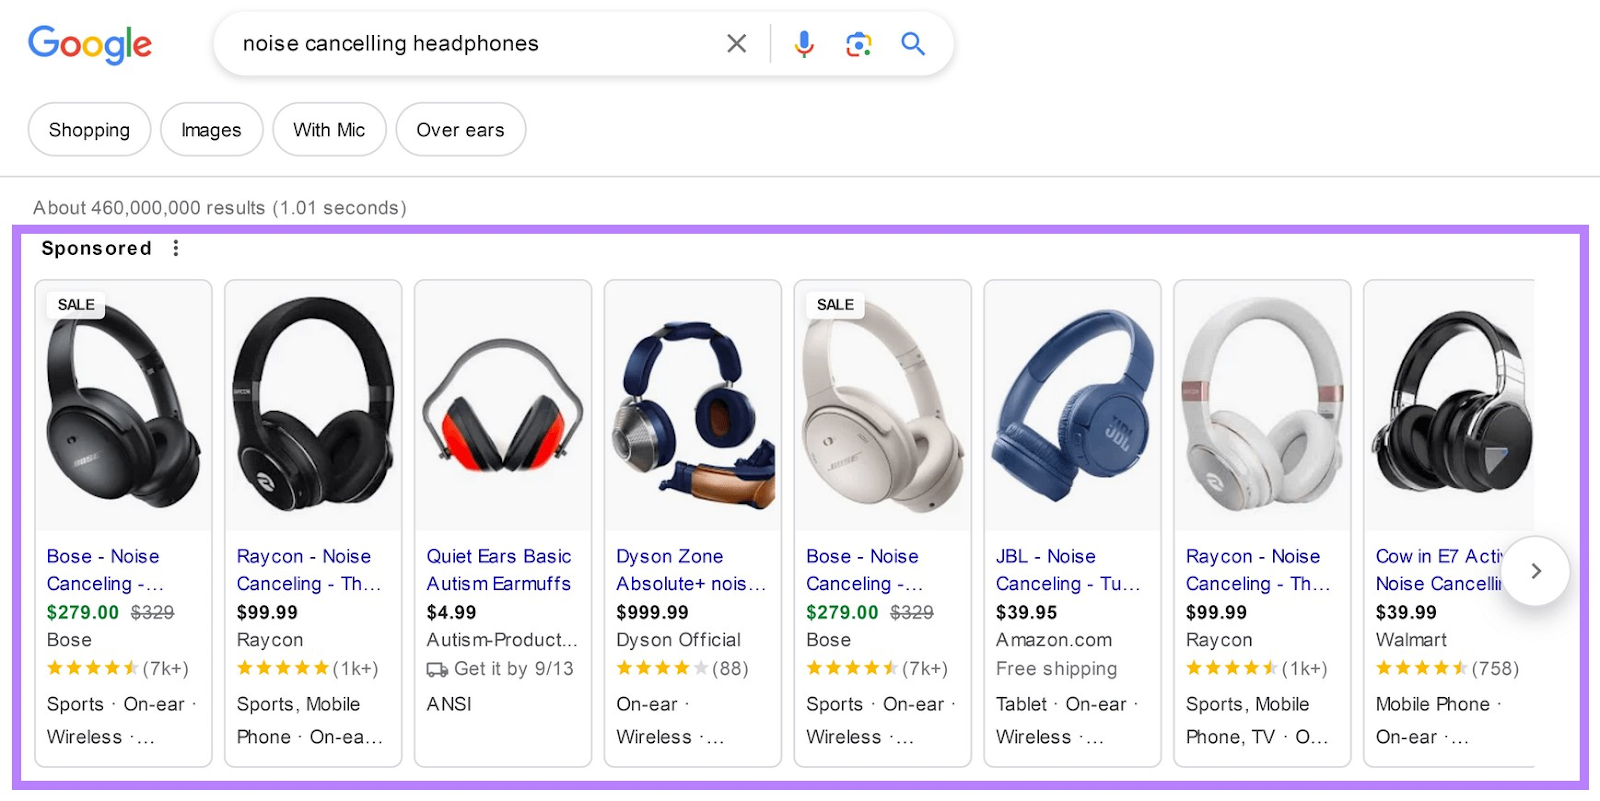 S،pping ads in Google SERP for "noise cancelling headp،nes" query